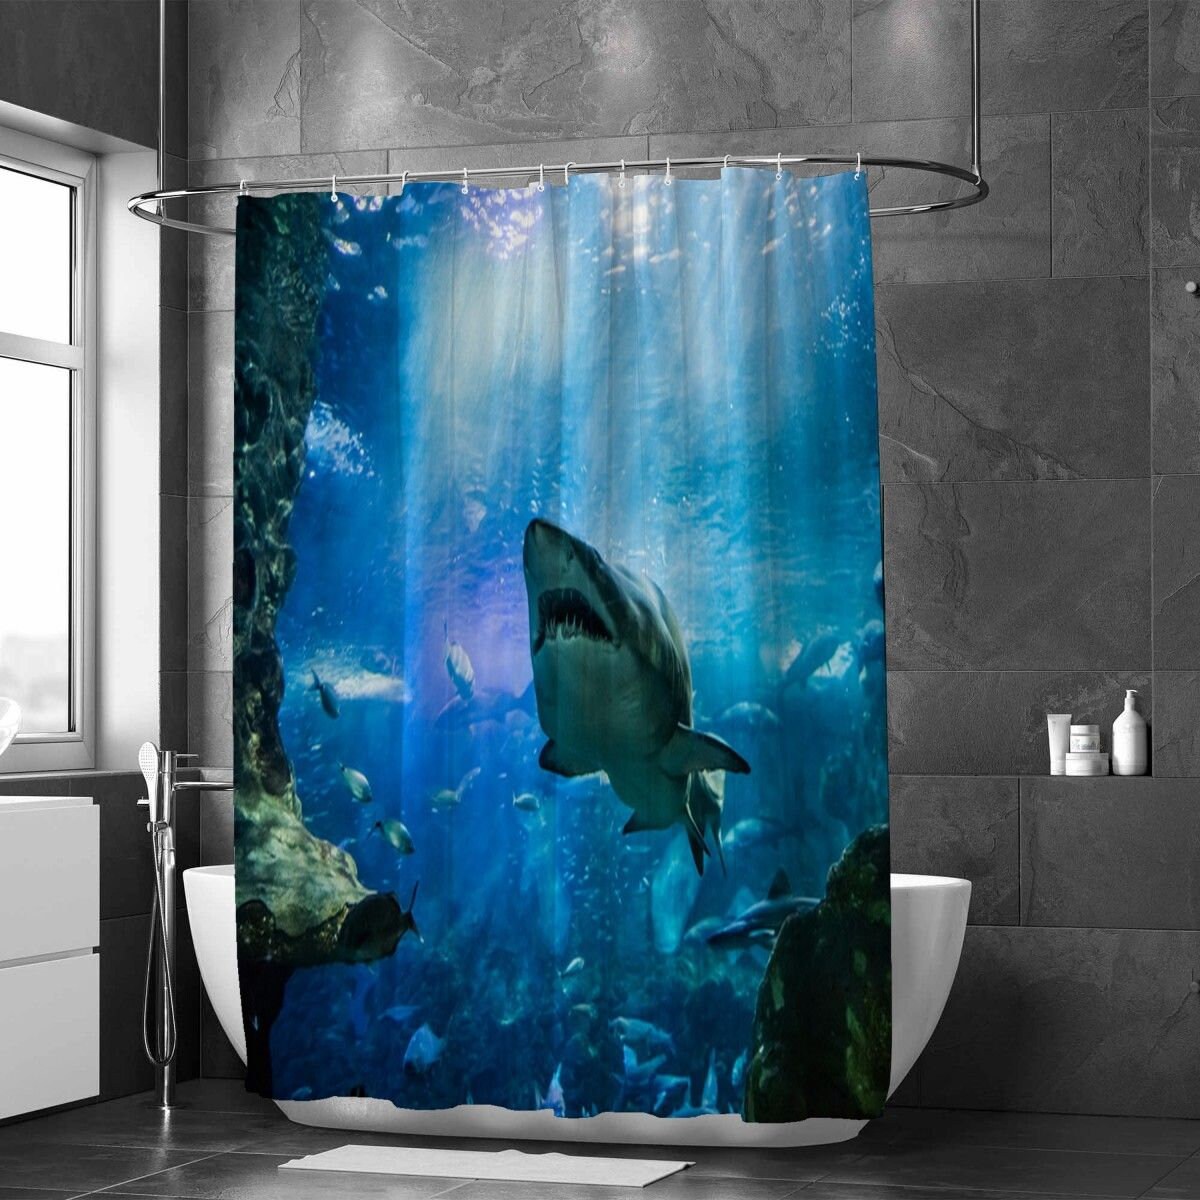 AOACreations Shower Curtain with Hooks Underwater World Sharks Mermaids Prints 